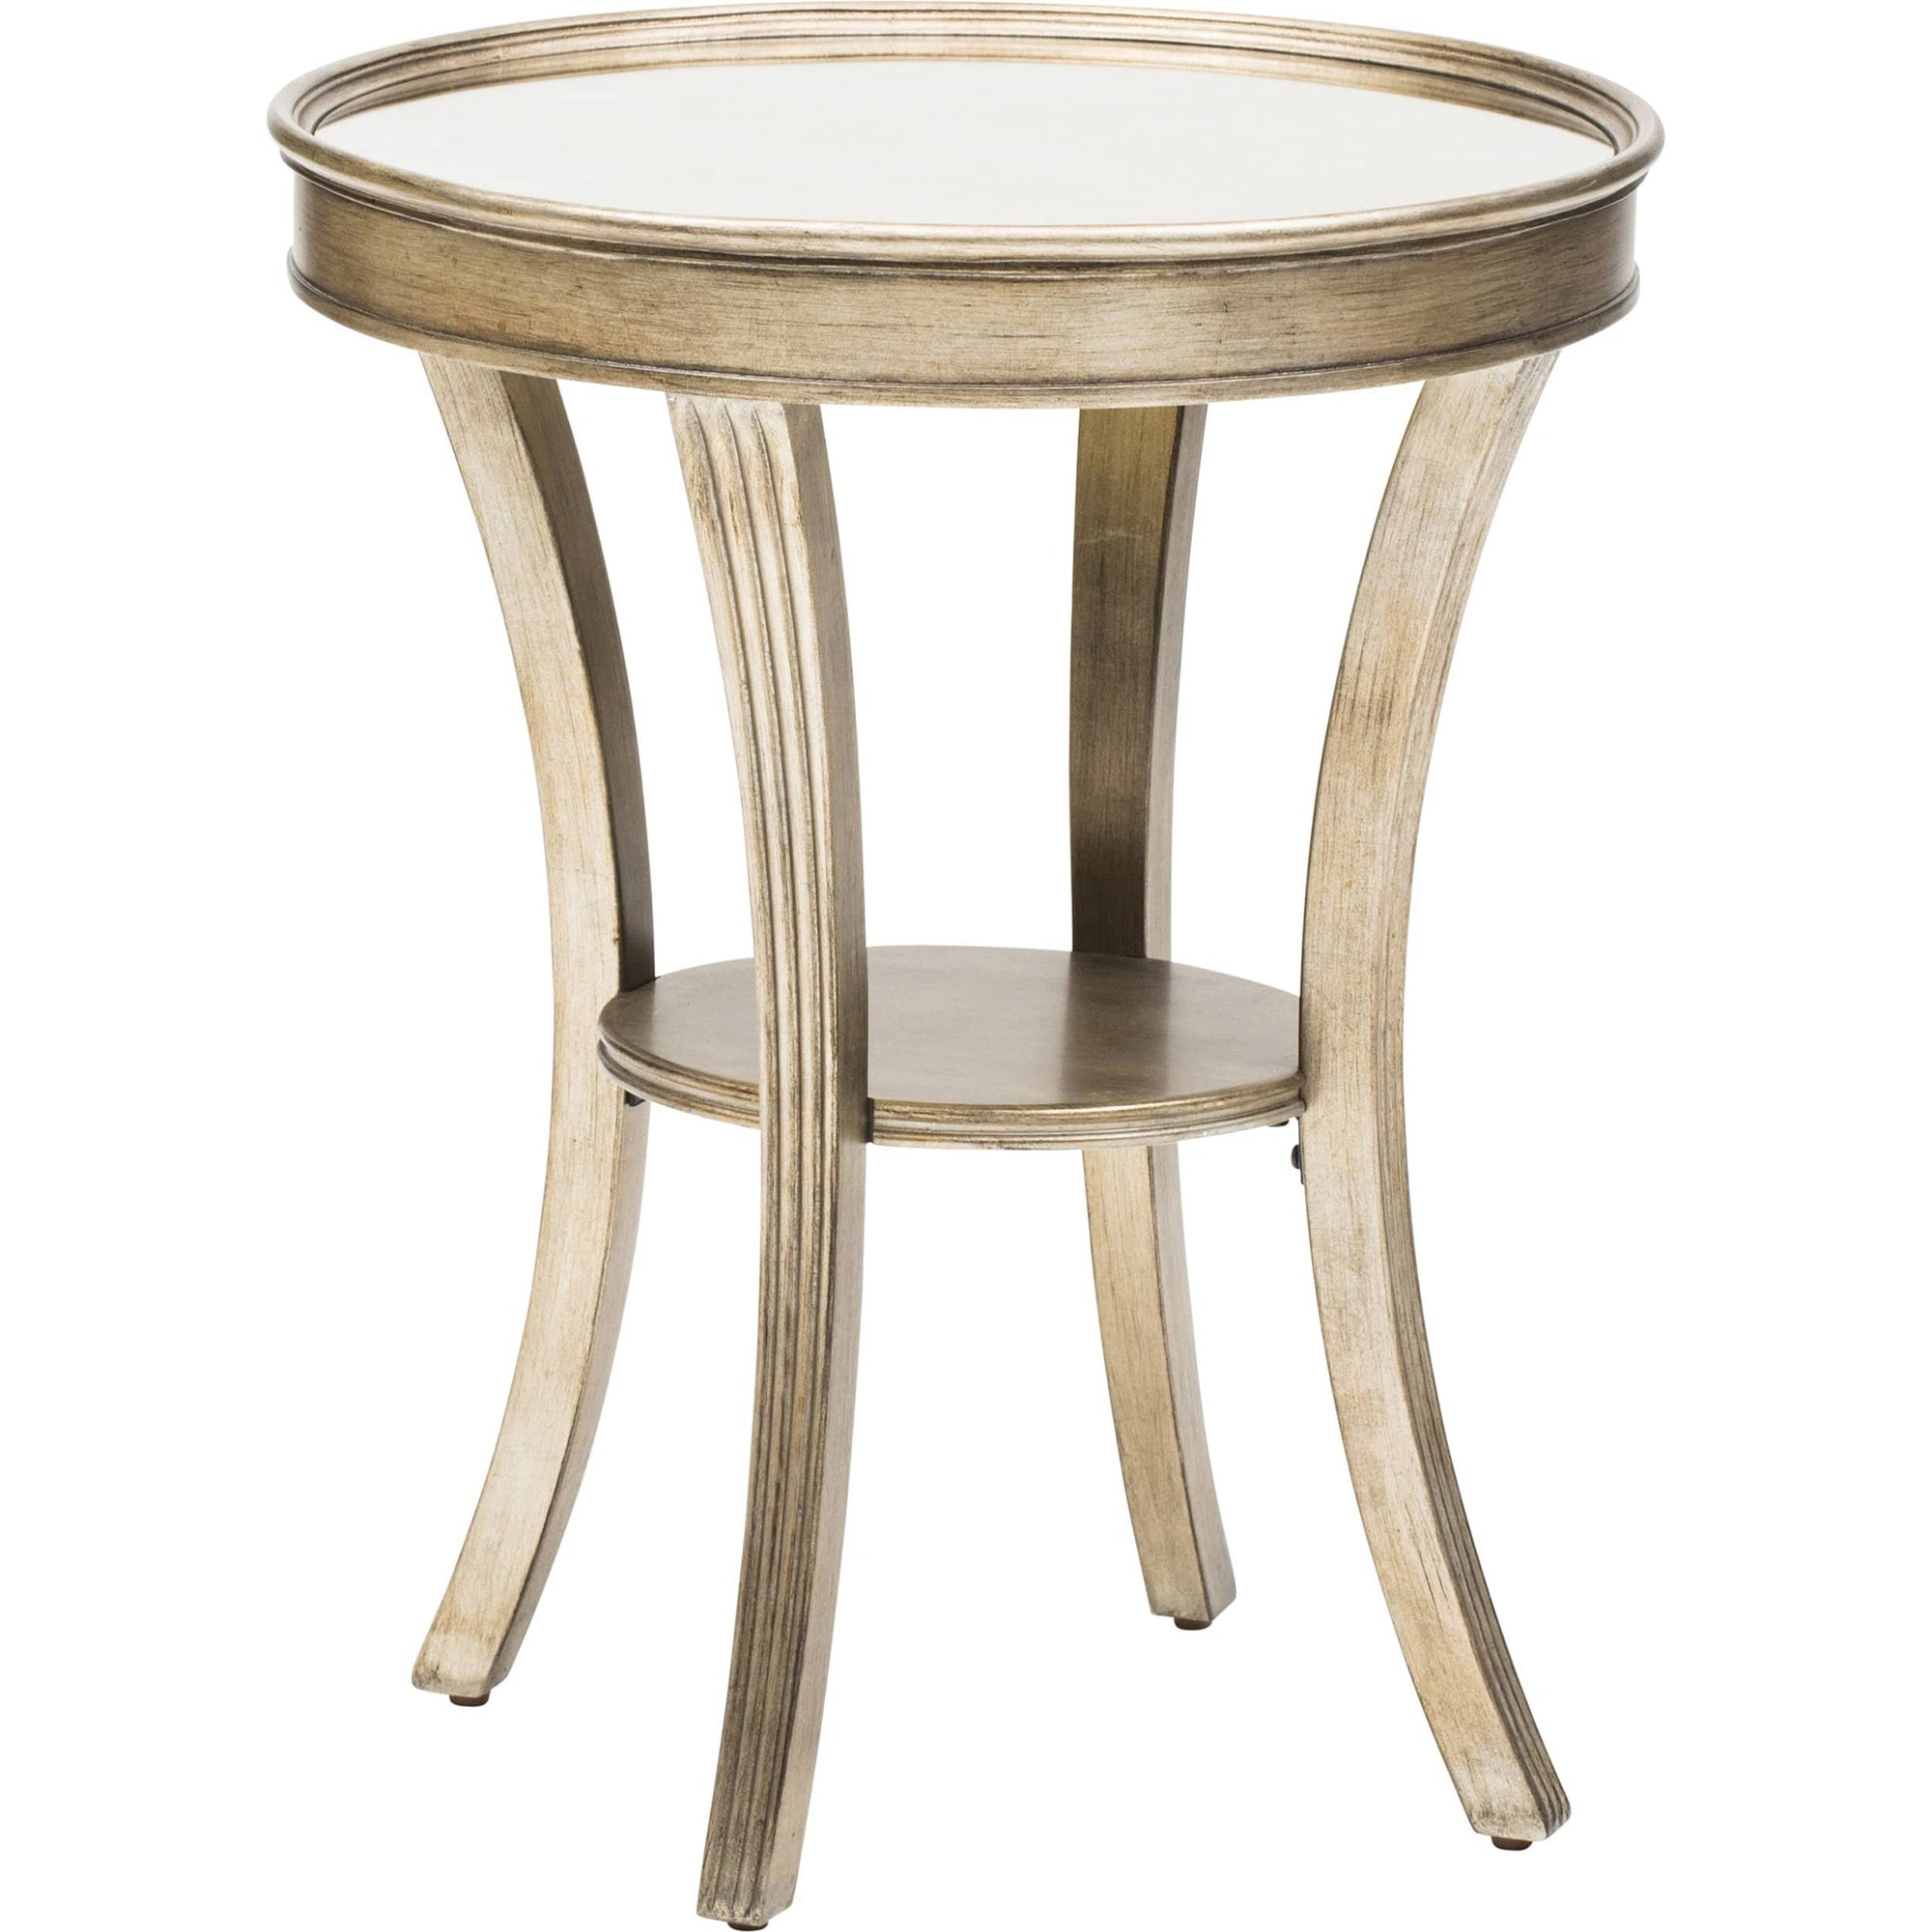 Round Mirror Accent Table High Fashion Home